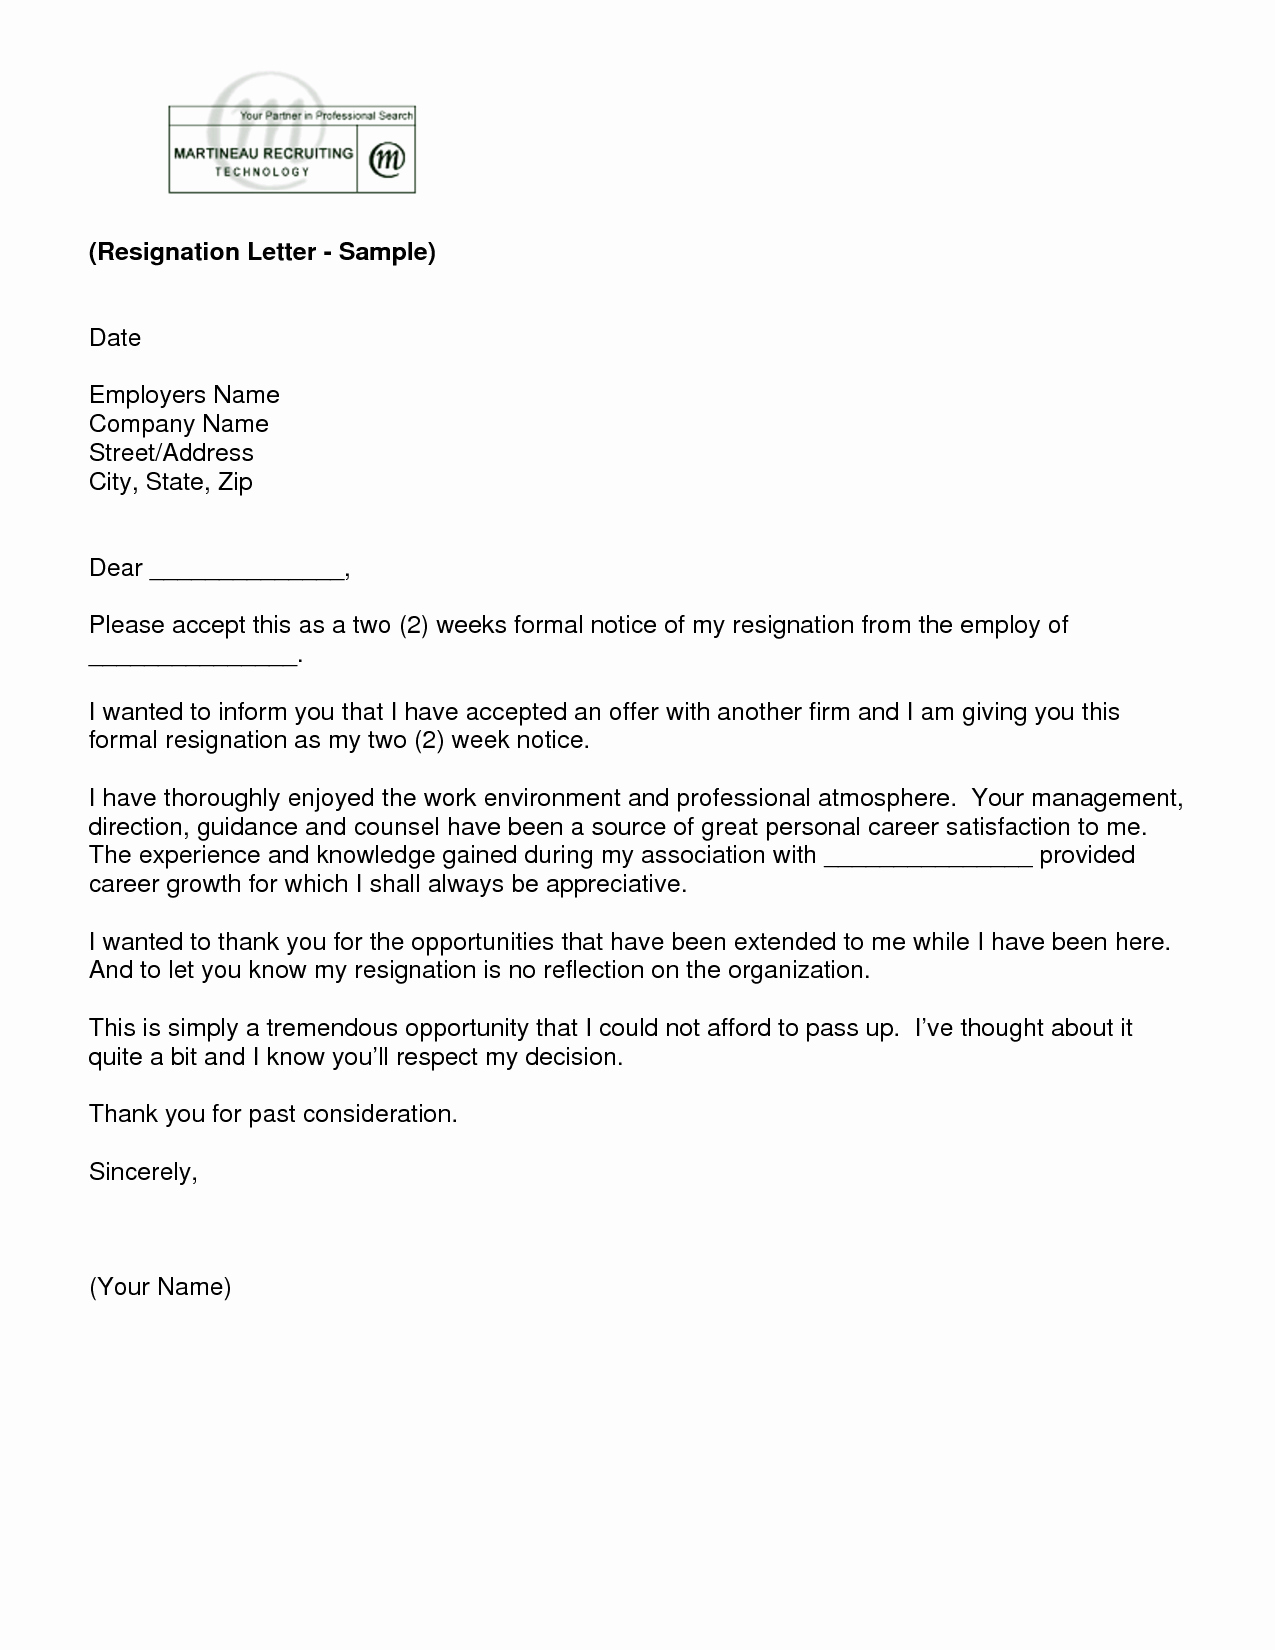 Professional Letter Of Resignation Unique Letter Of Resignation 2 Weeks Notice Template